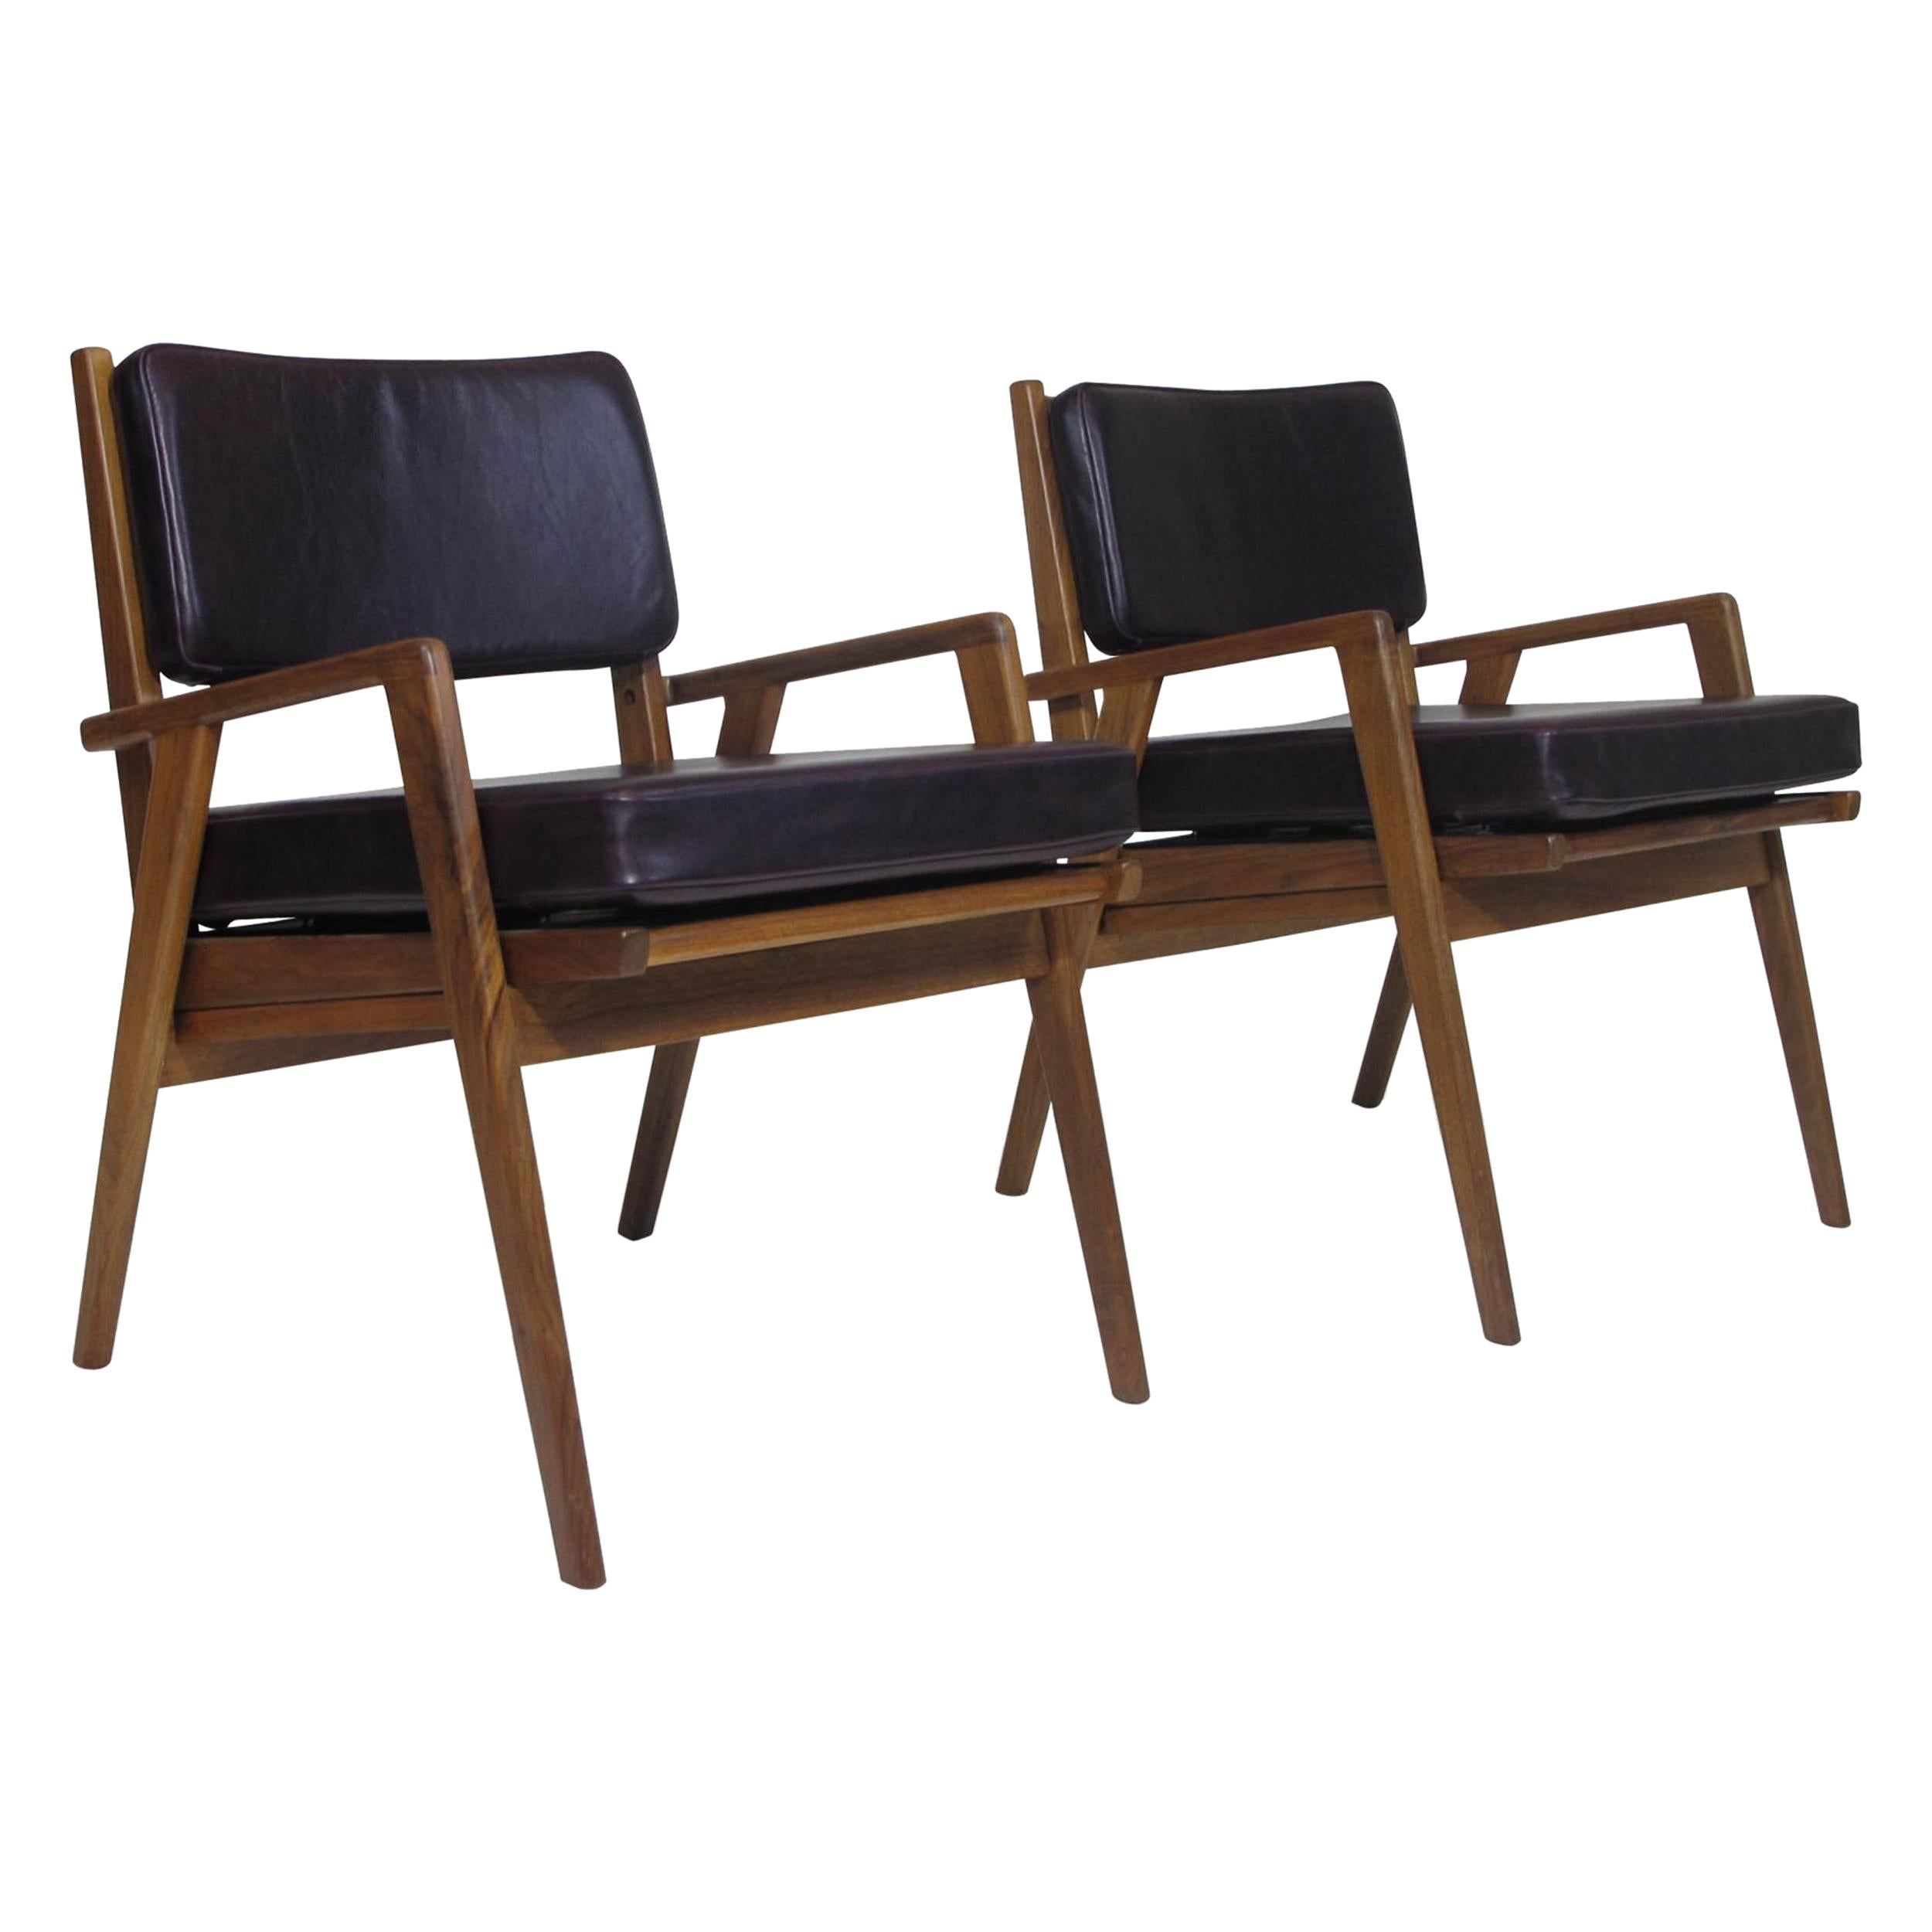 Pair of midcentury walnut lounge chairs attributed Jens Risom crafted of a solid black walnut frames with an angled arms. Newly upholstered cushions in a top-grain aubergine leather. Excellent condition.